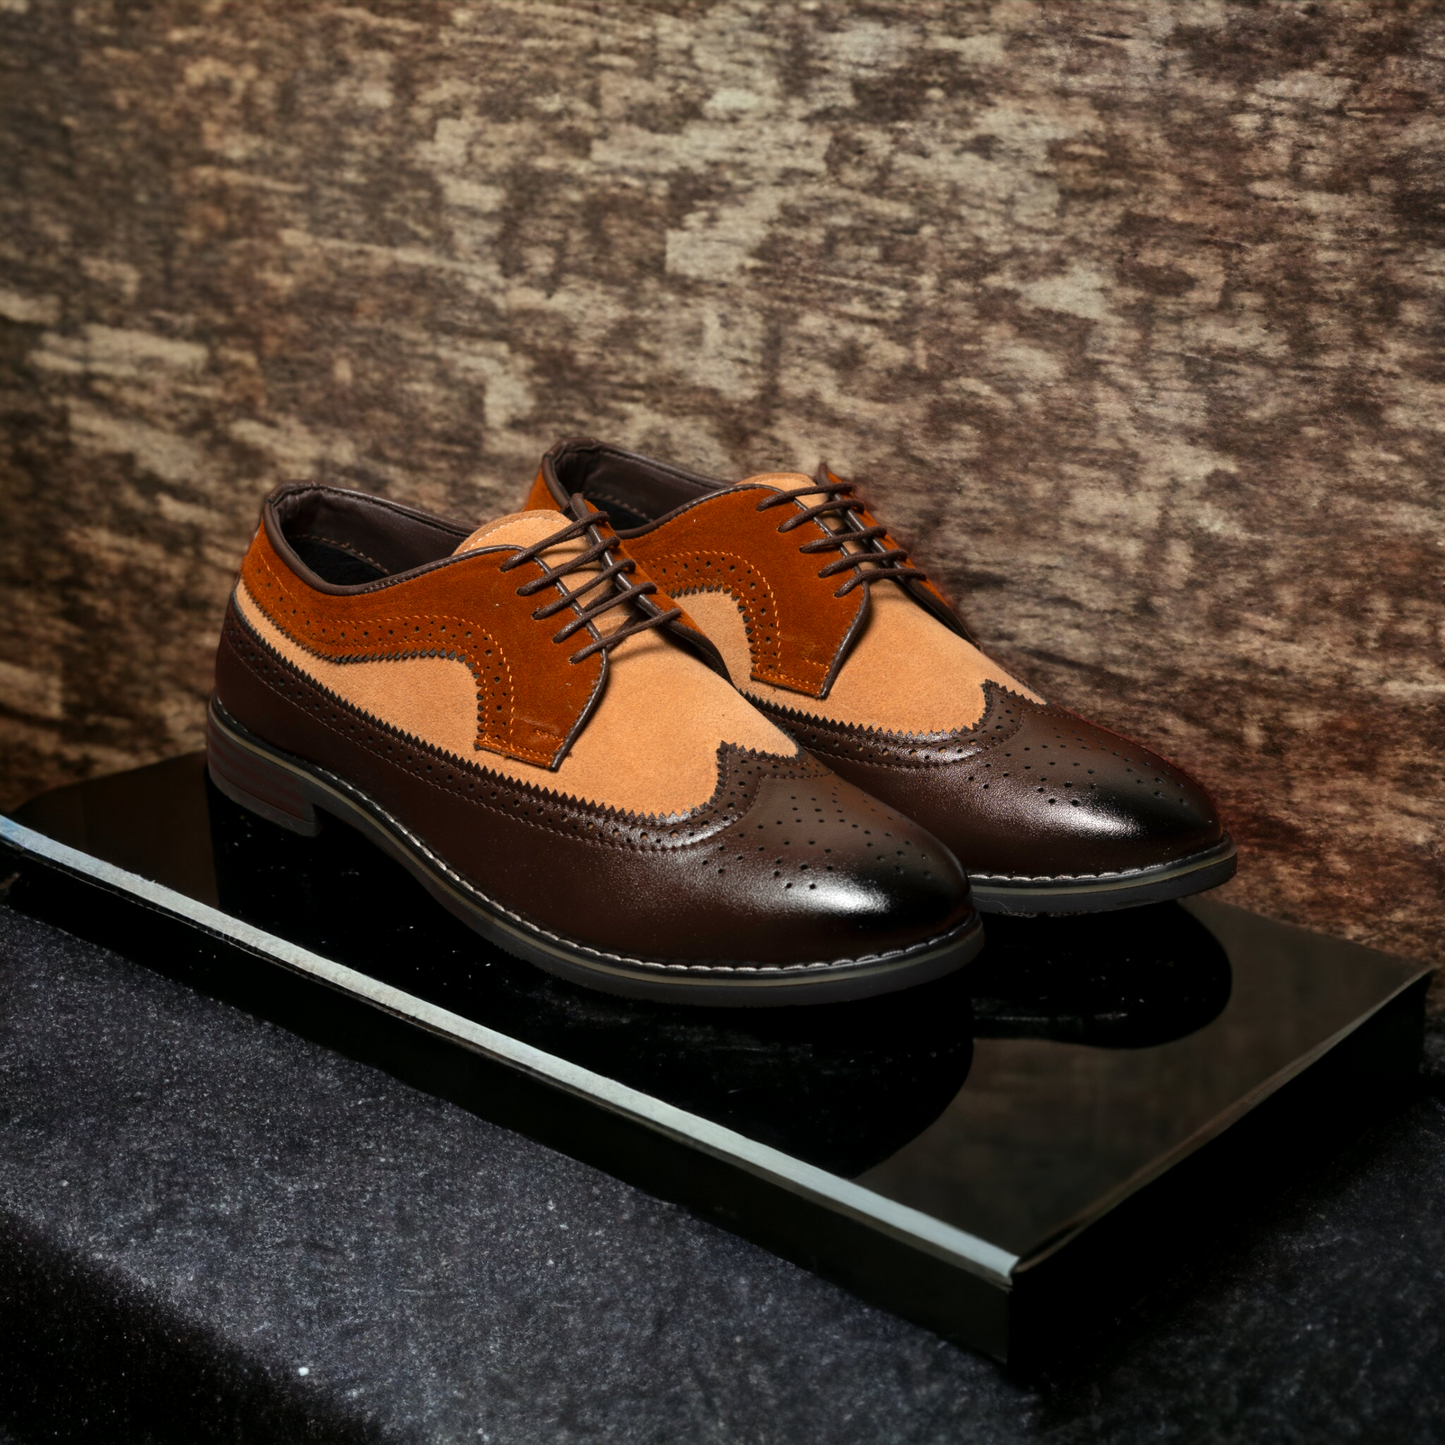 The Aurous Rogue Laceup Semi-Formal Brogues With Wingtips